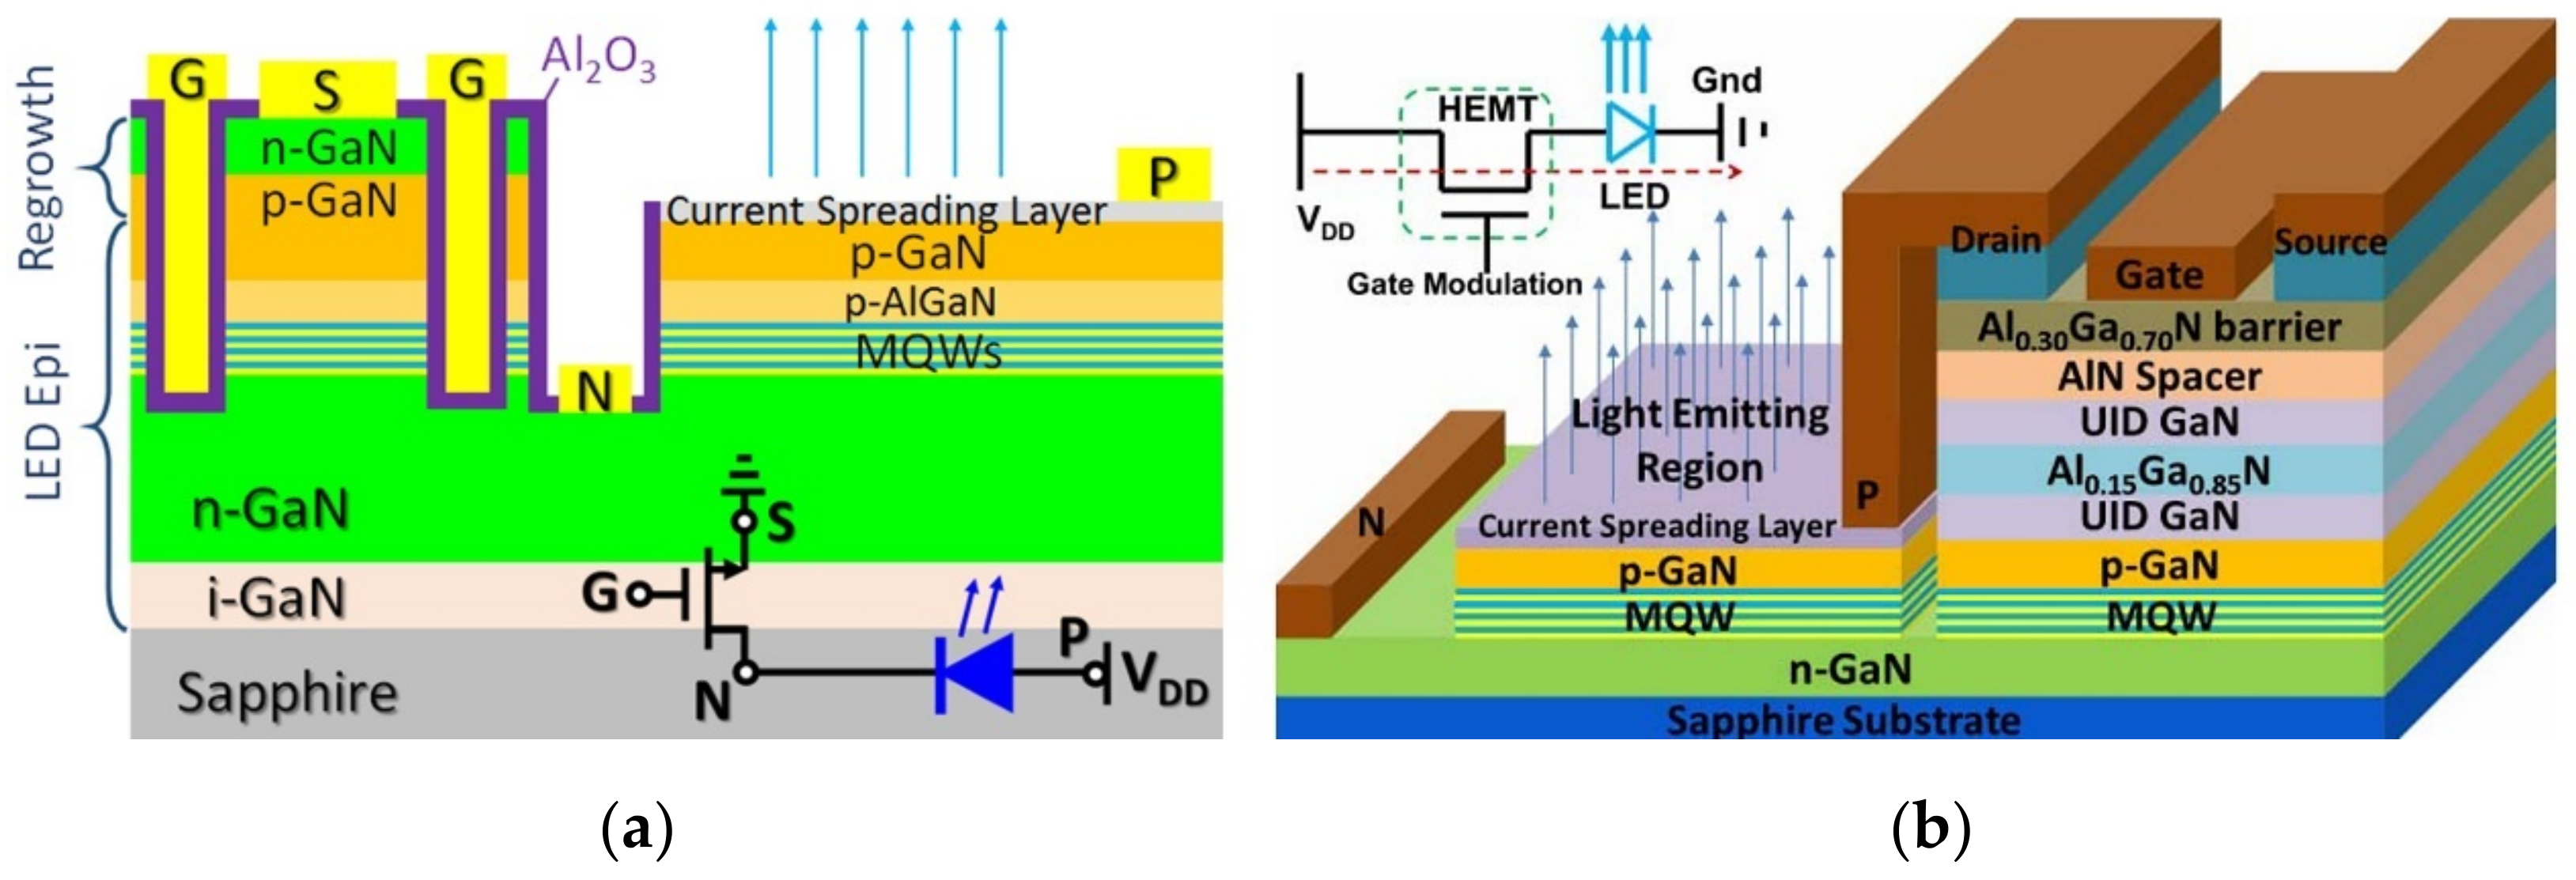 Integration Technology of Micro-LED for Next-Generation Display